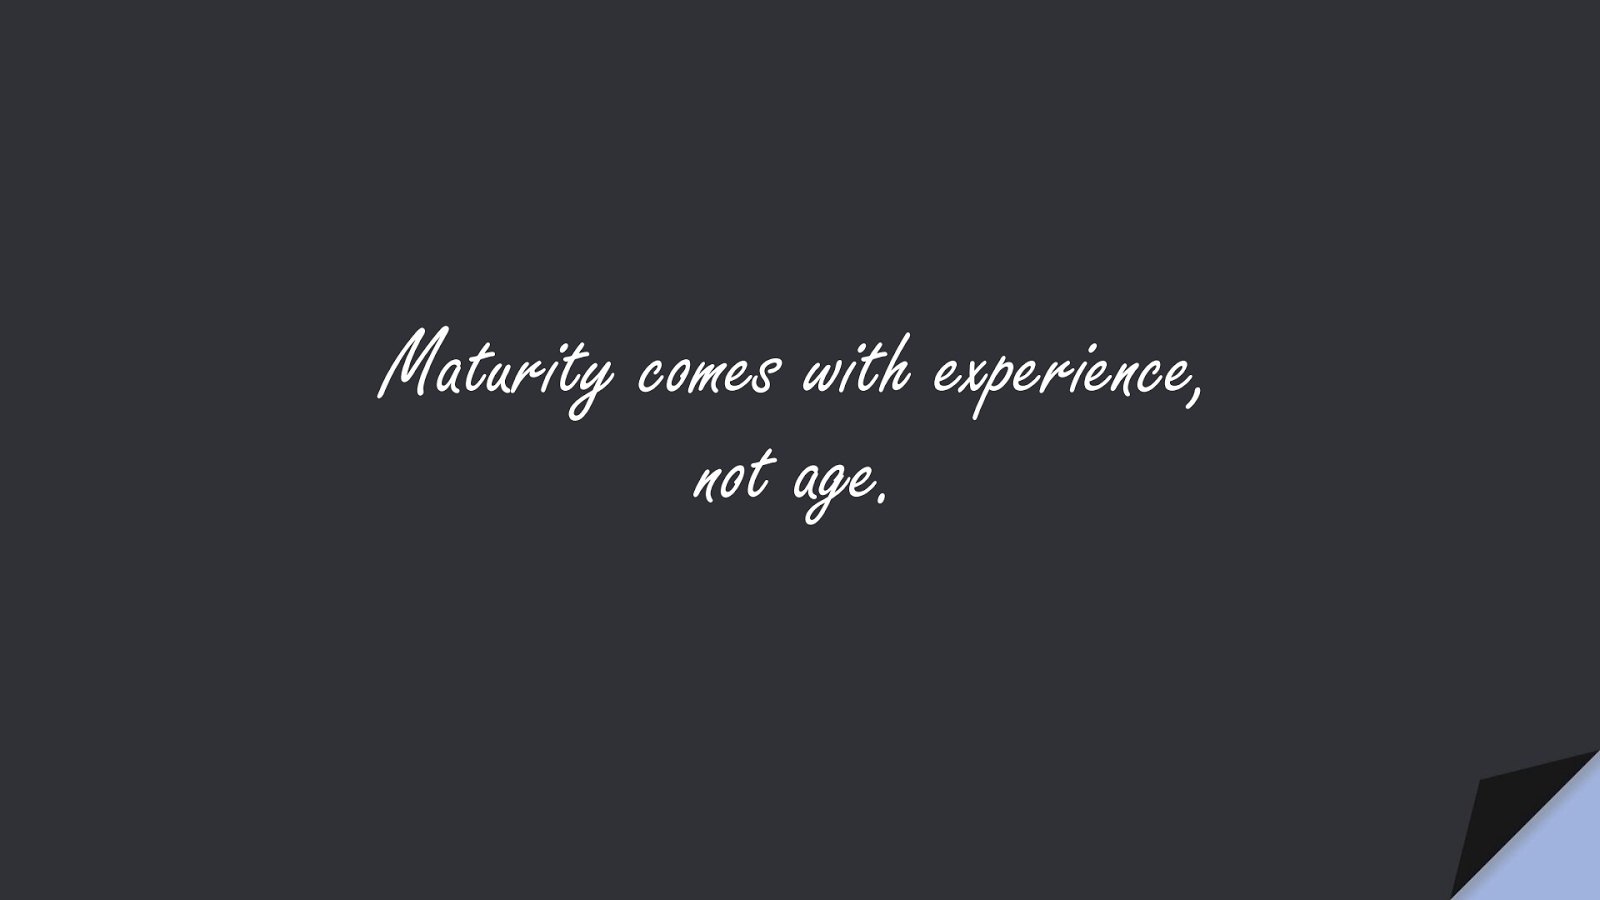 Maturity comes with experience, not age.FALSE